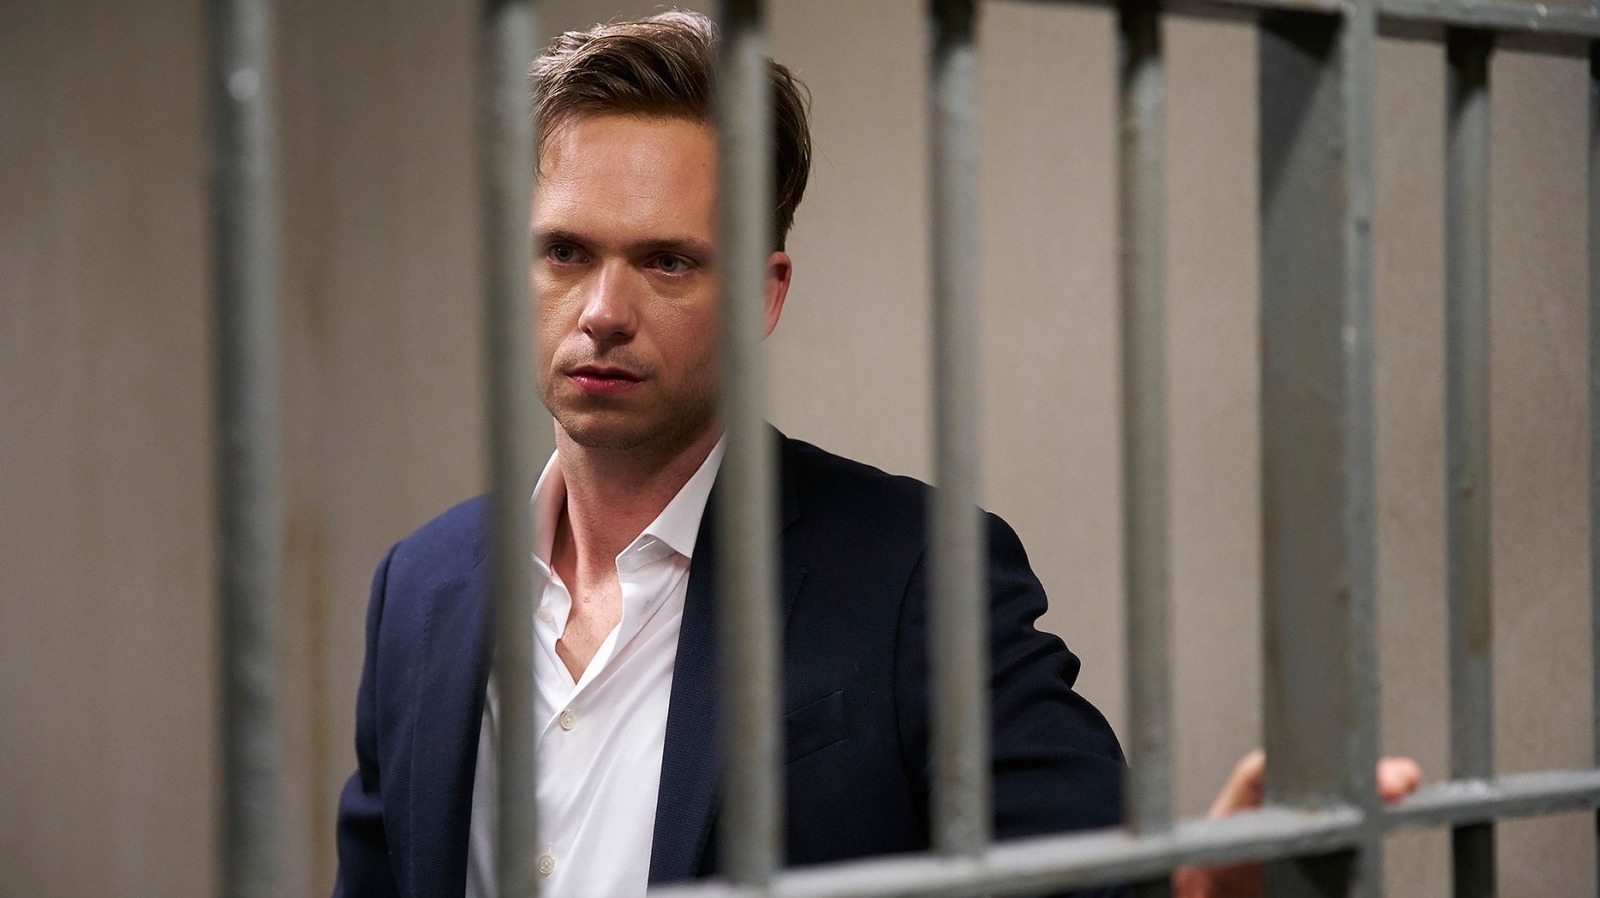 Suits Built An Entire Prison Set That The Show Barely Even Used